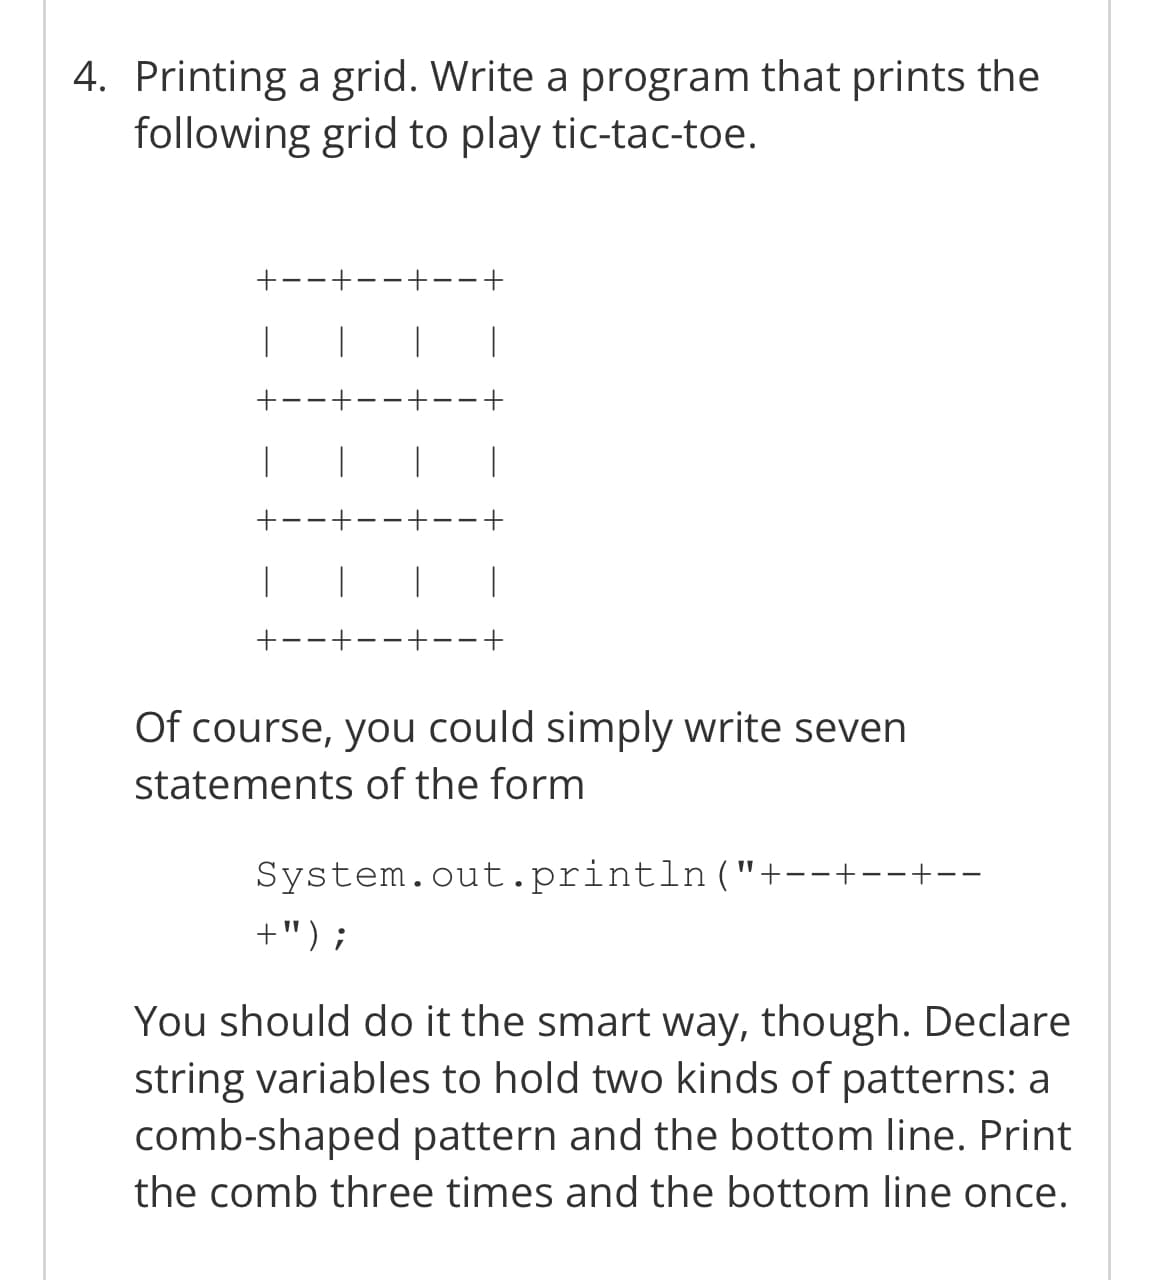 4. Printing a grid. Write a program that prints the
following grid to play tic-tac-toe.
|
1
I
+
---+
|
I
--+
Of course, you could simply write seven
statements of the form
System.out.println("+--+--+--
+") ;
You should do it the smart way, though. Declare
string variables to hold two kinds of patterns: a
comb-shaped pattern and the bottom line. Print
the comb three times and the bottom line once.
+